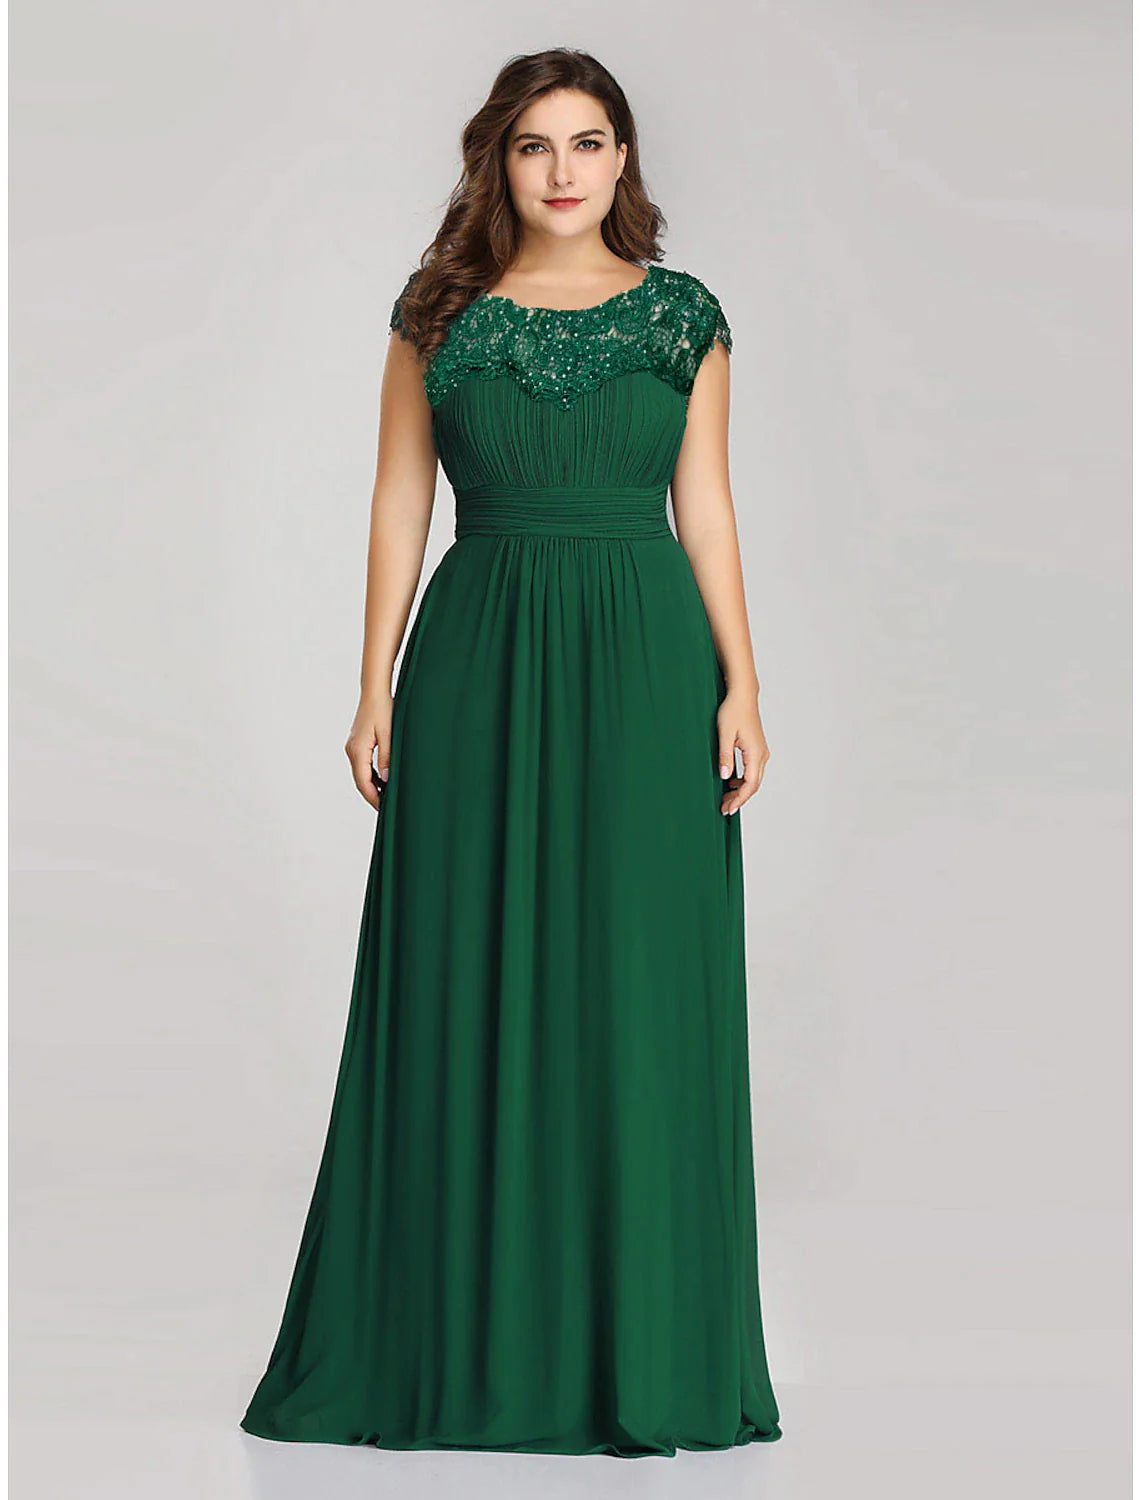 A-Line Mother of the Bride Dress Plus Size Jewel Neck Floor Length Chiffon Short Sleeve with Lace Ruching